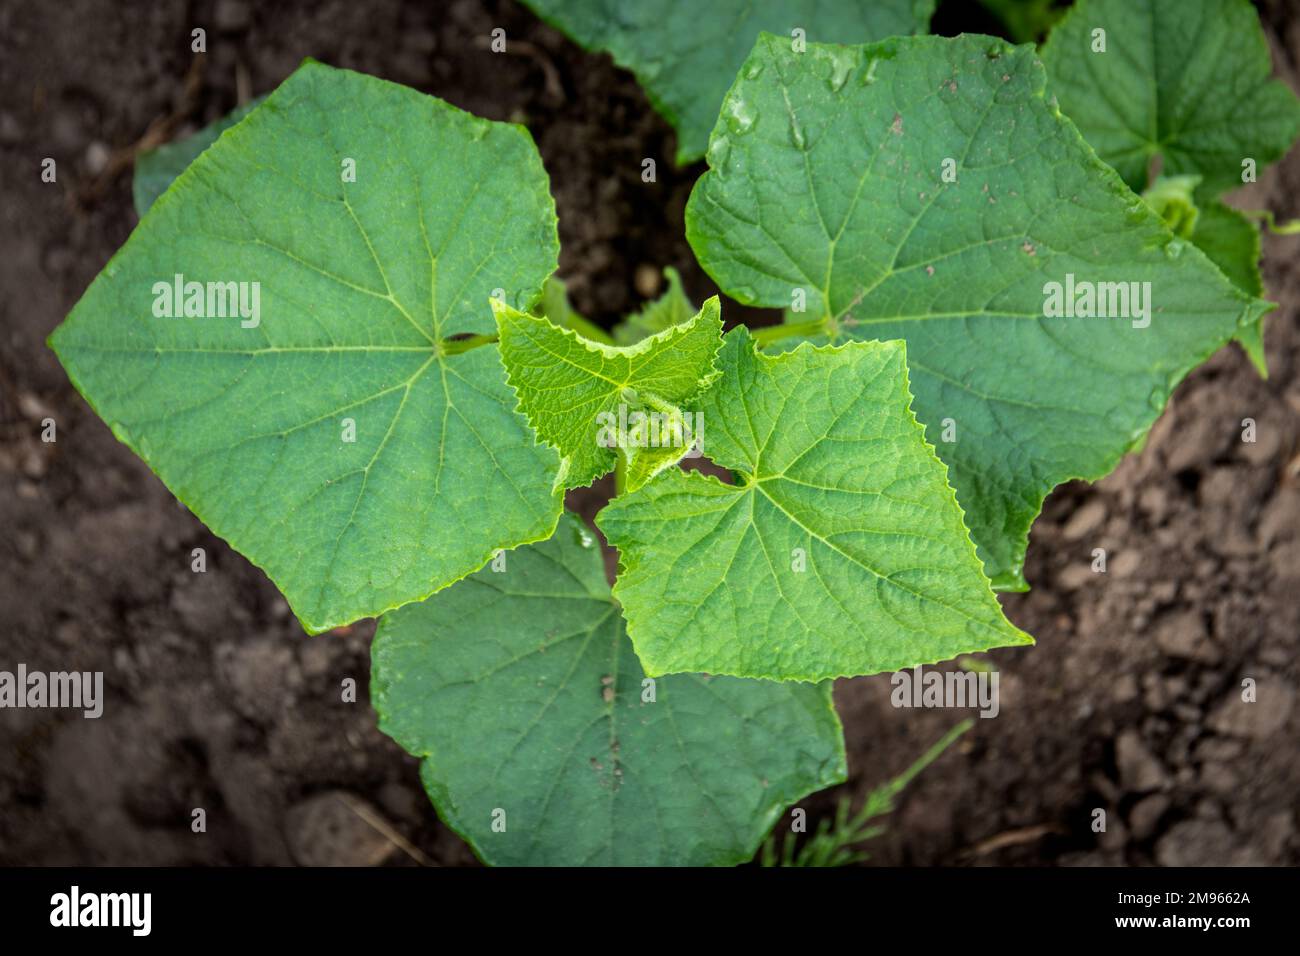 Leaves of the cucumber plant. Gardening, natural and organic food. Stock Photo